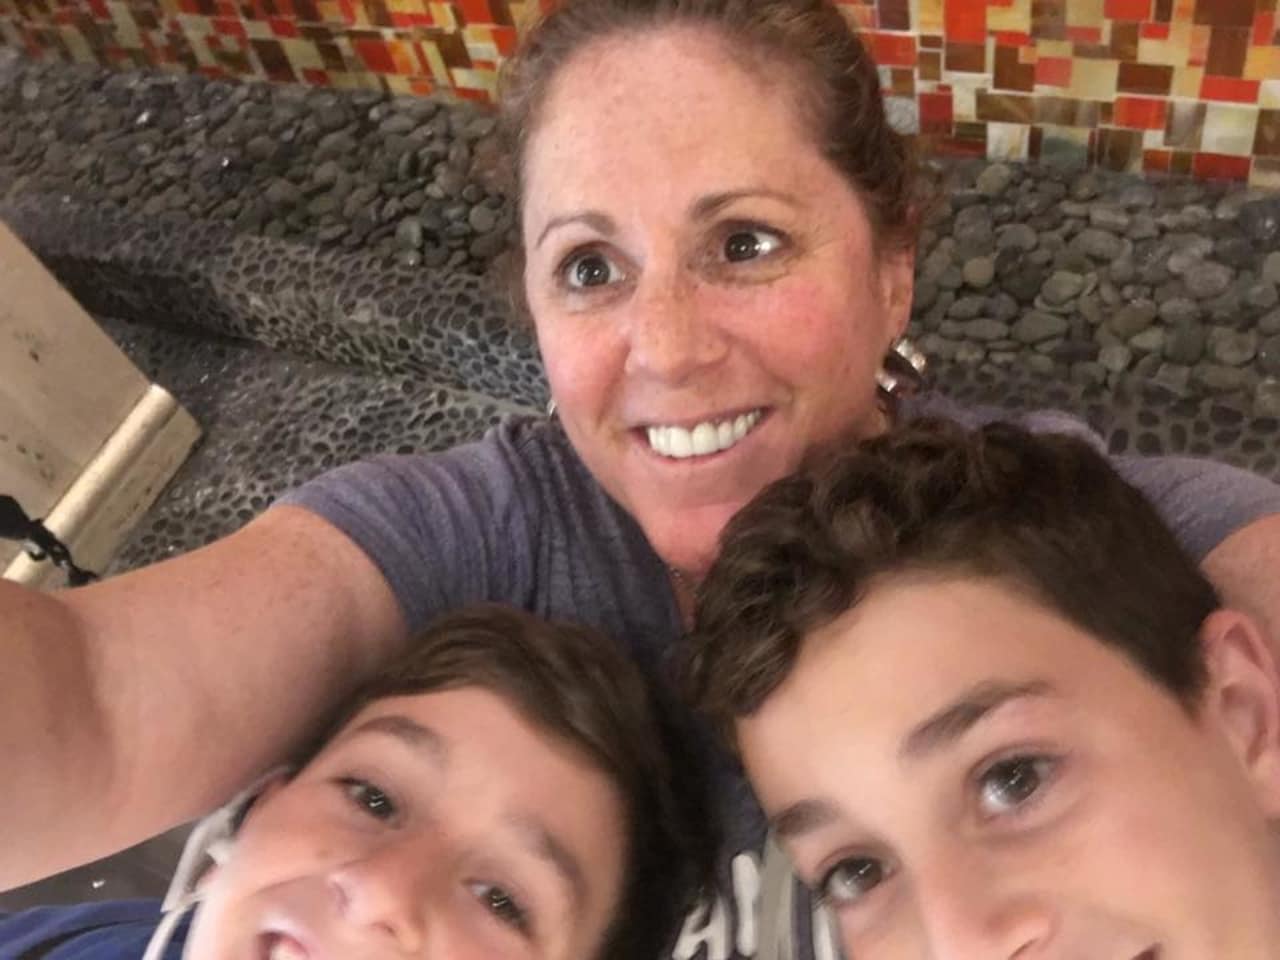 Robin Honigstock Krooks of Fair Lawn and two of her four kids.